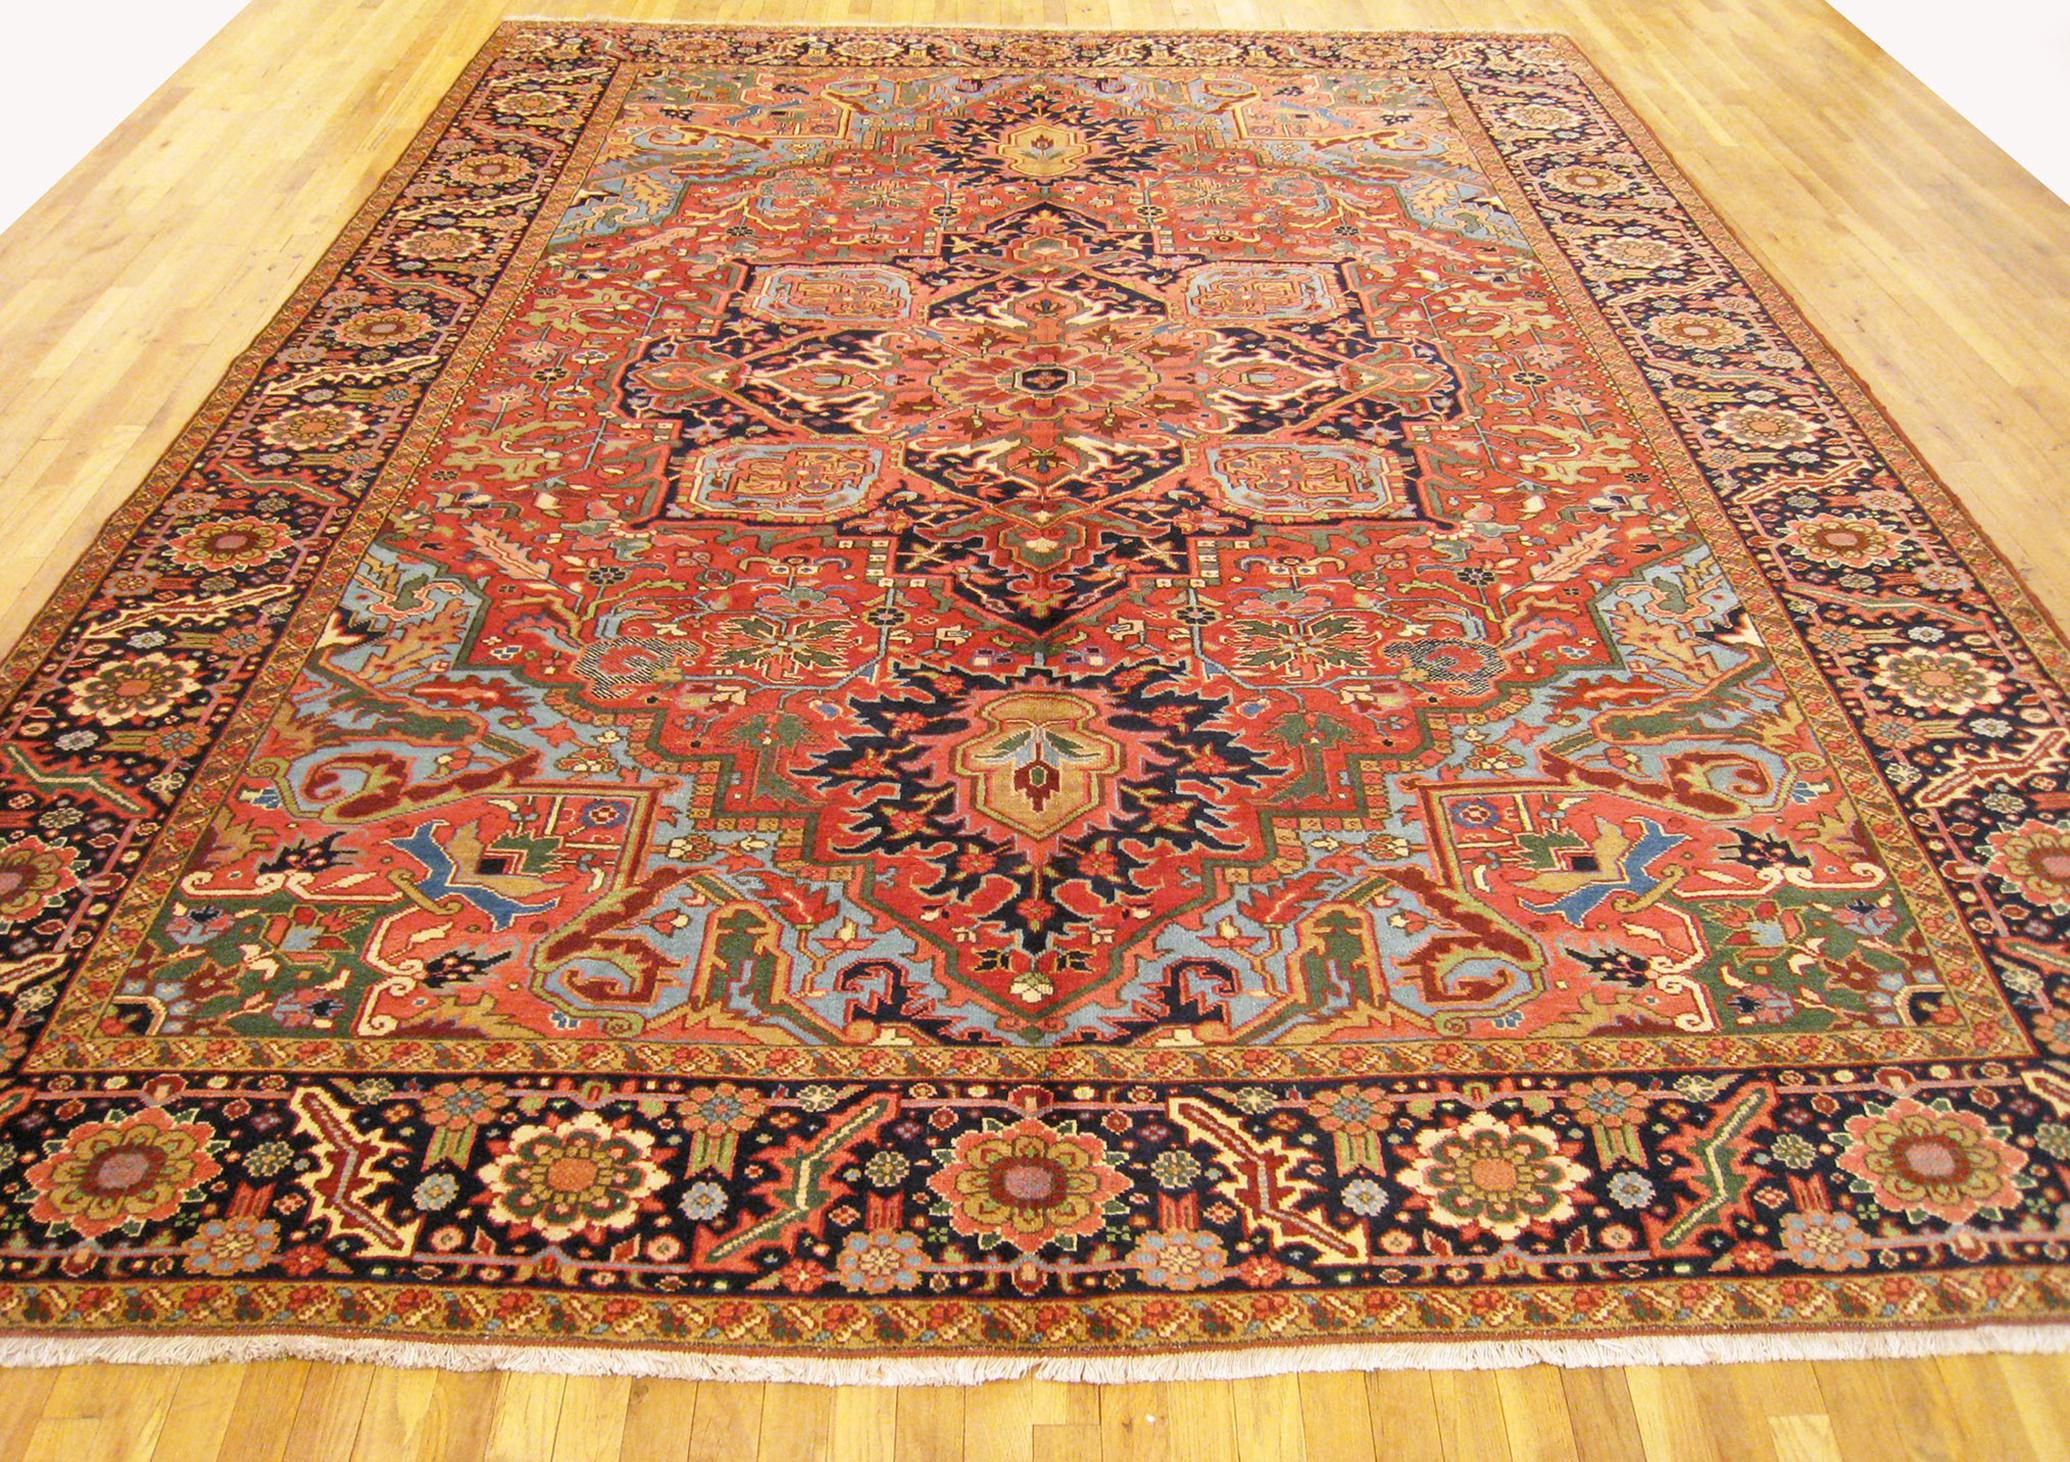 Hand-Knotted Vintage Persian Decorative Orienta Herizl Rug in Room Size